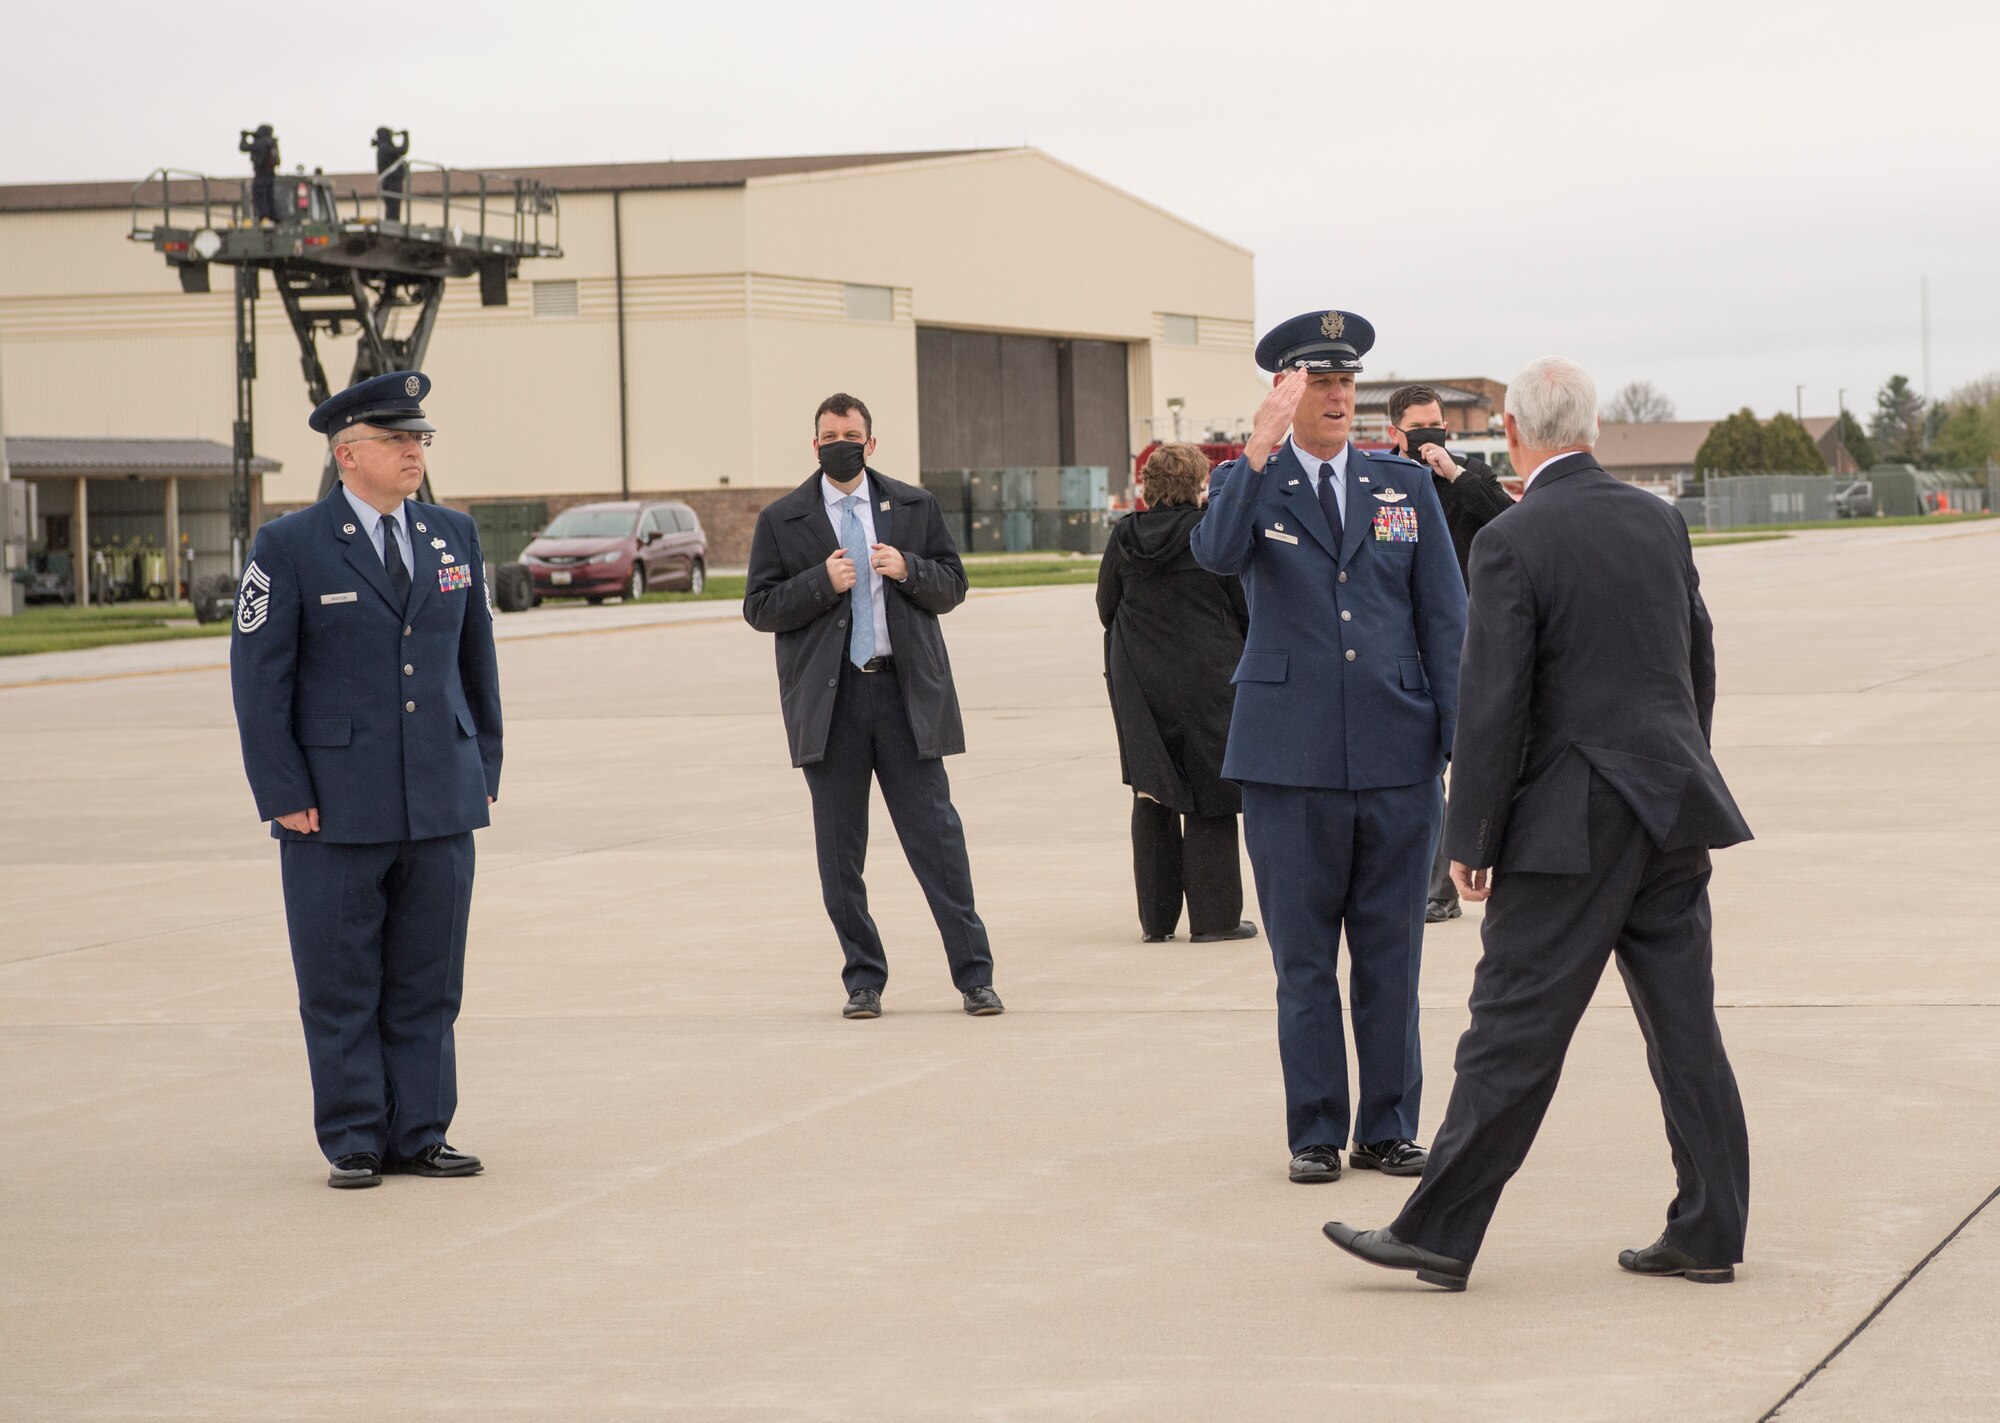 Col. Larry Shaw, 434th Air Refueling Wing Commander salutes Vice President Mike Pence upon his arrival at Grissom Air Reserve Base, Indiana April 30, 2020. Pence came to Indiana to meet with local business leaders who are building ventilators during the COVID-19 outbreak. (U.S Air Force photo/Ben Mota)